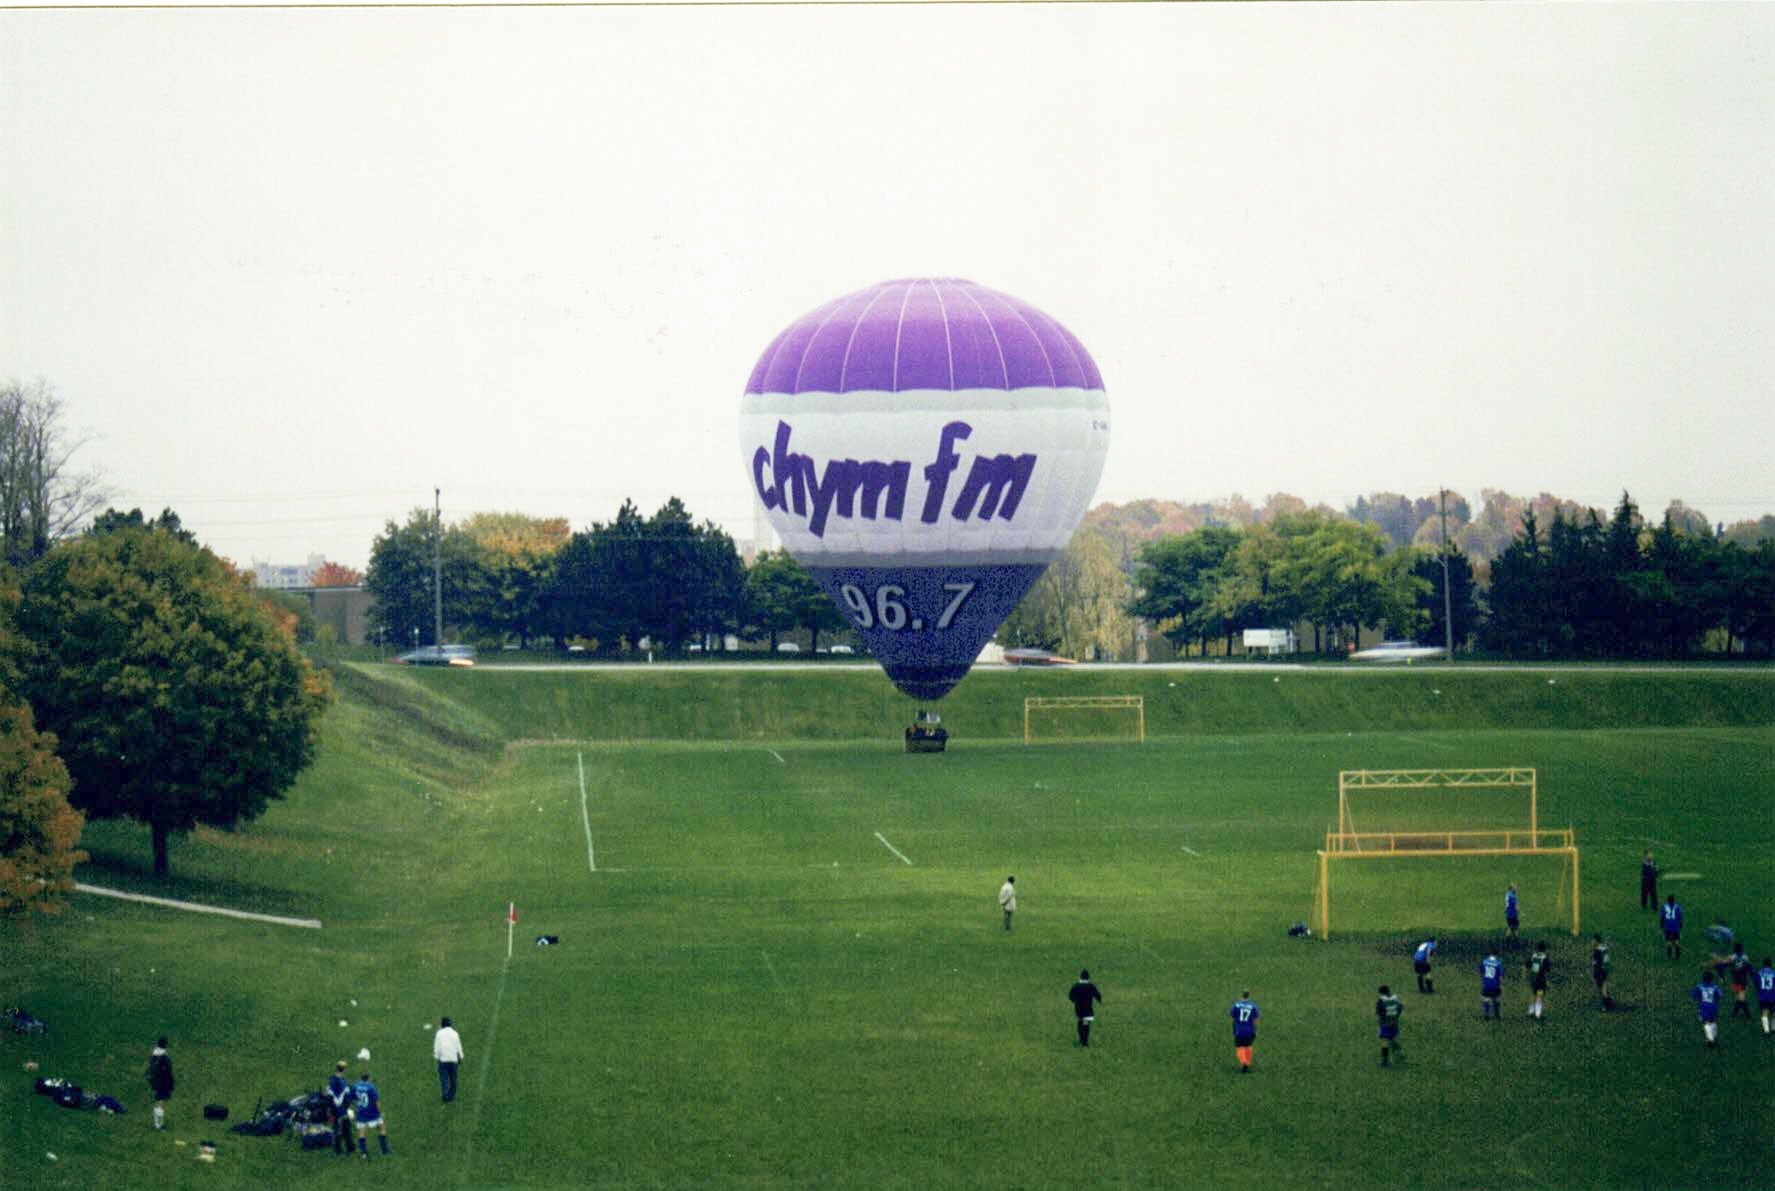 A purple and white hot air balloon takes off from a field. a few people are gathered around it.